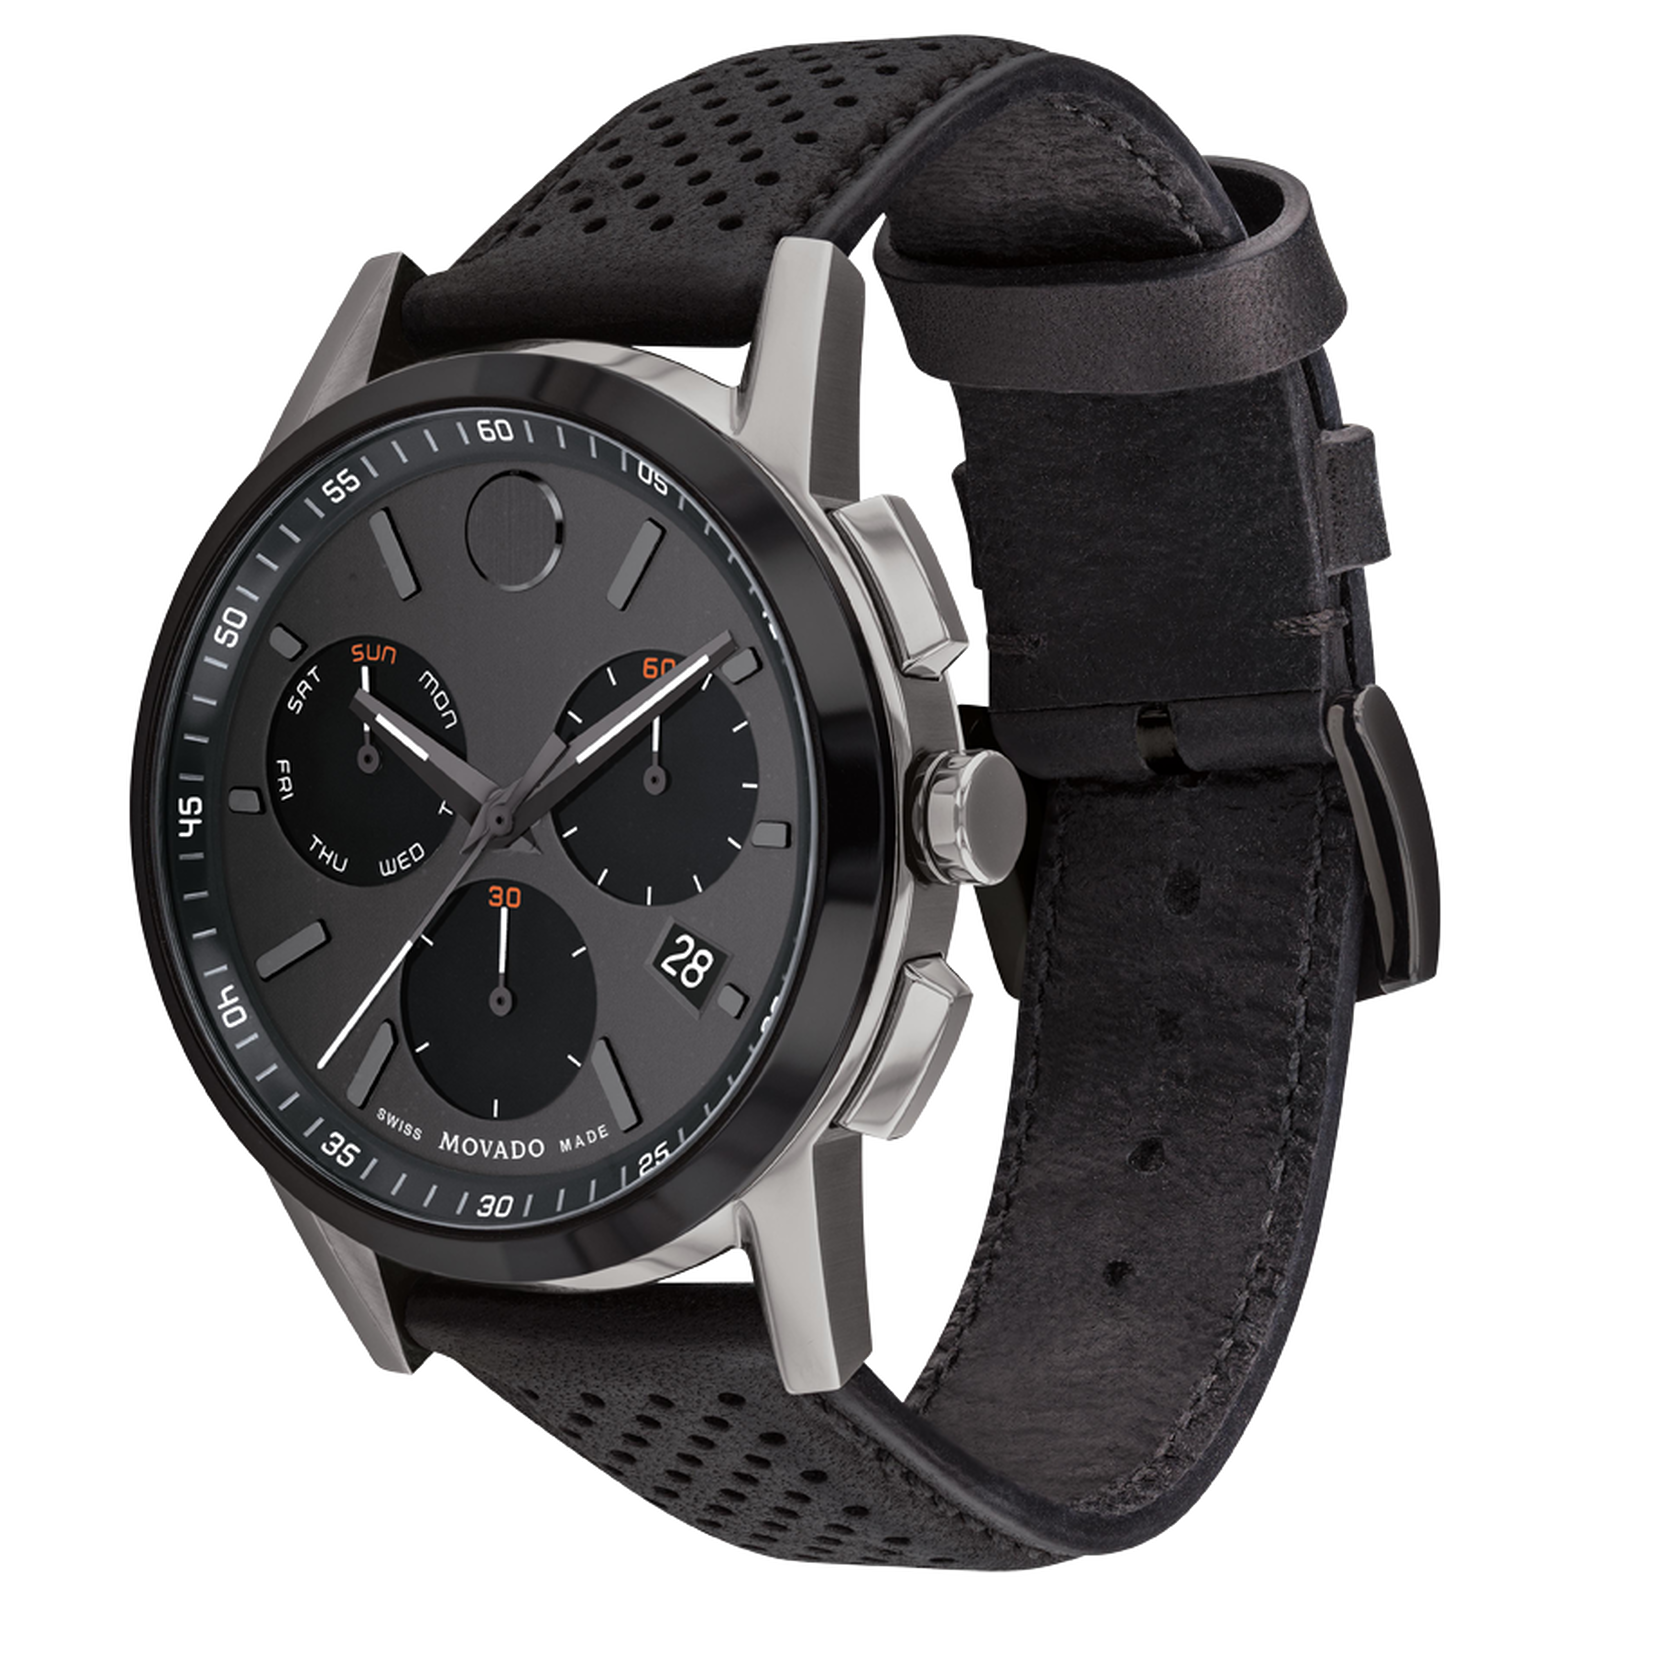 Movado | Movado Museum watch black strap dial chronograph leather Sport black perforated with